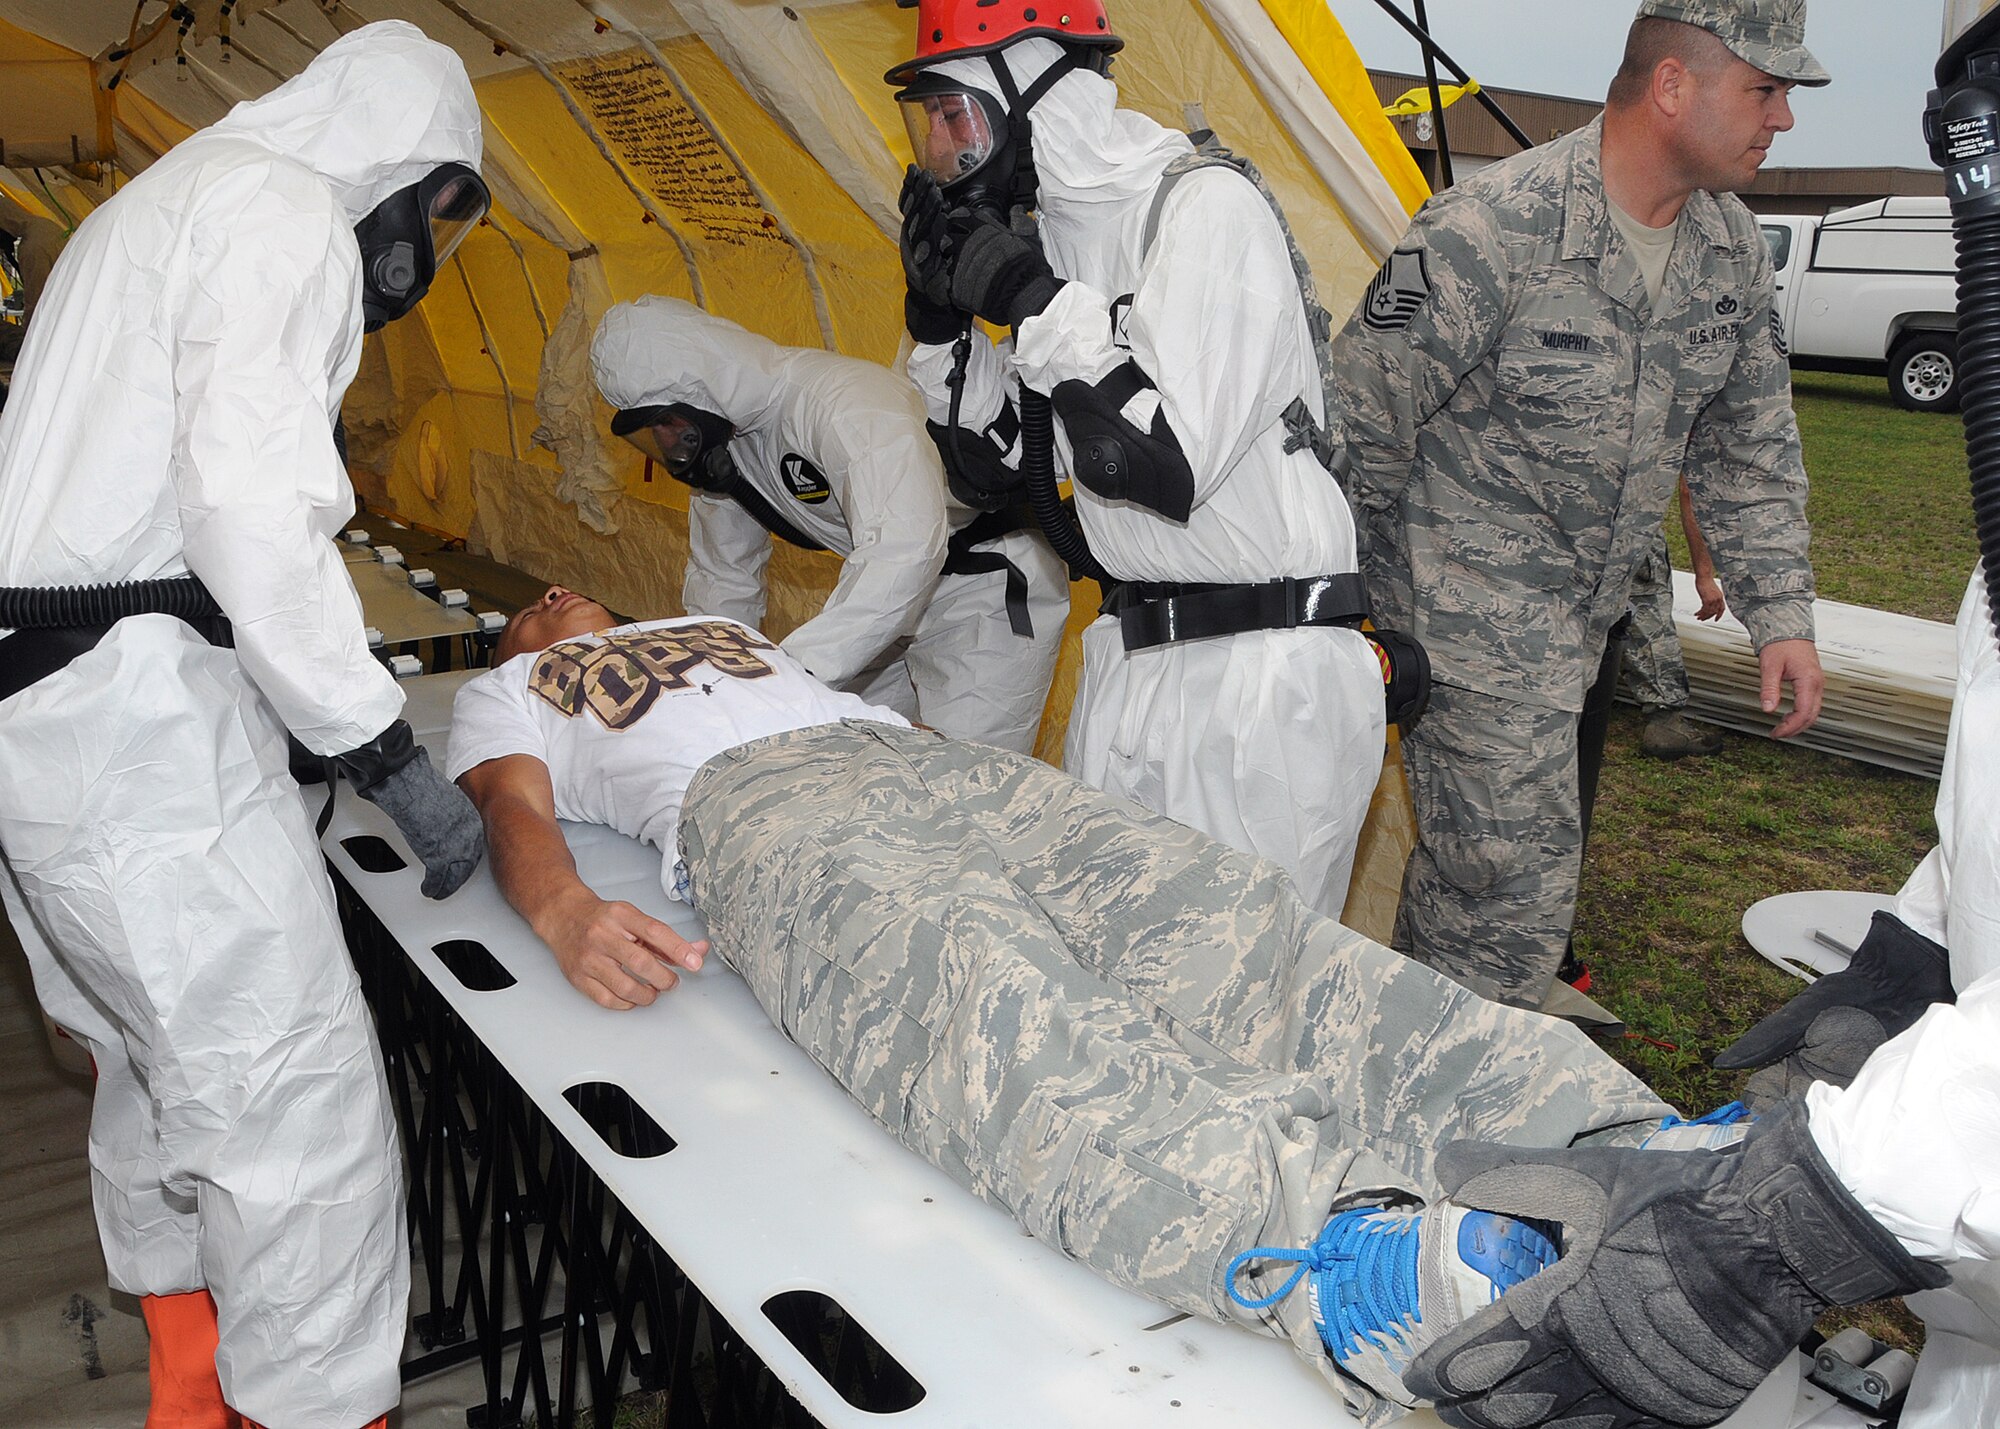 Members of the 143d Airlift Wing involved in the Region 1 Chemical, Biological, Radiological, Nuclear, High Yield Explosive Enhanced Response Force Package (CERFP) perform a training exercise to demonstrate the team's responsibilities and capabilities to potential new members and leadership. A member of the RIANG Student Flight (on stretcher) volunteered to play a victim for the exercise. The Region 1 CERFP is made up of members of the Air and Army National Guard from Maine, New Hampshire, and Rhode Island. National Guard Photo by Master Sgt Janeen Miller (RELEASED)